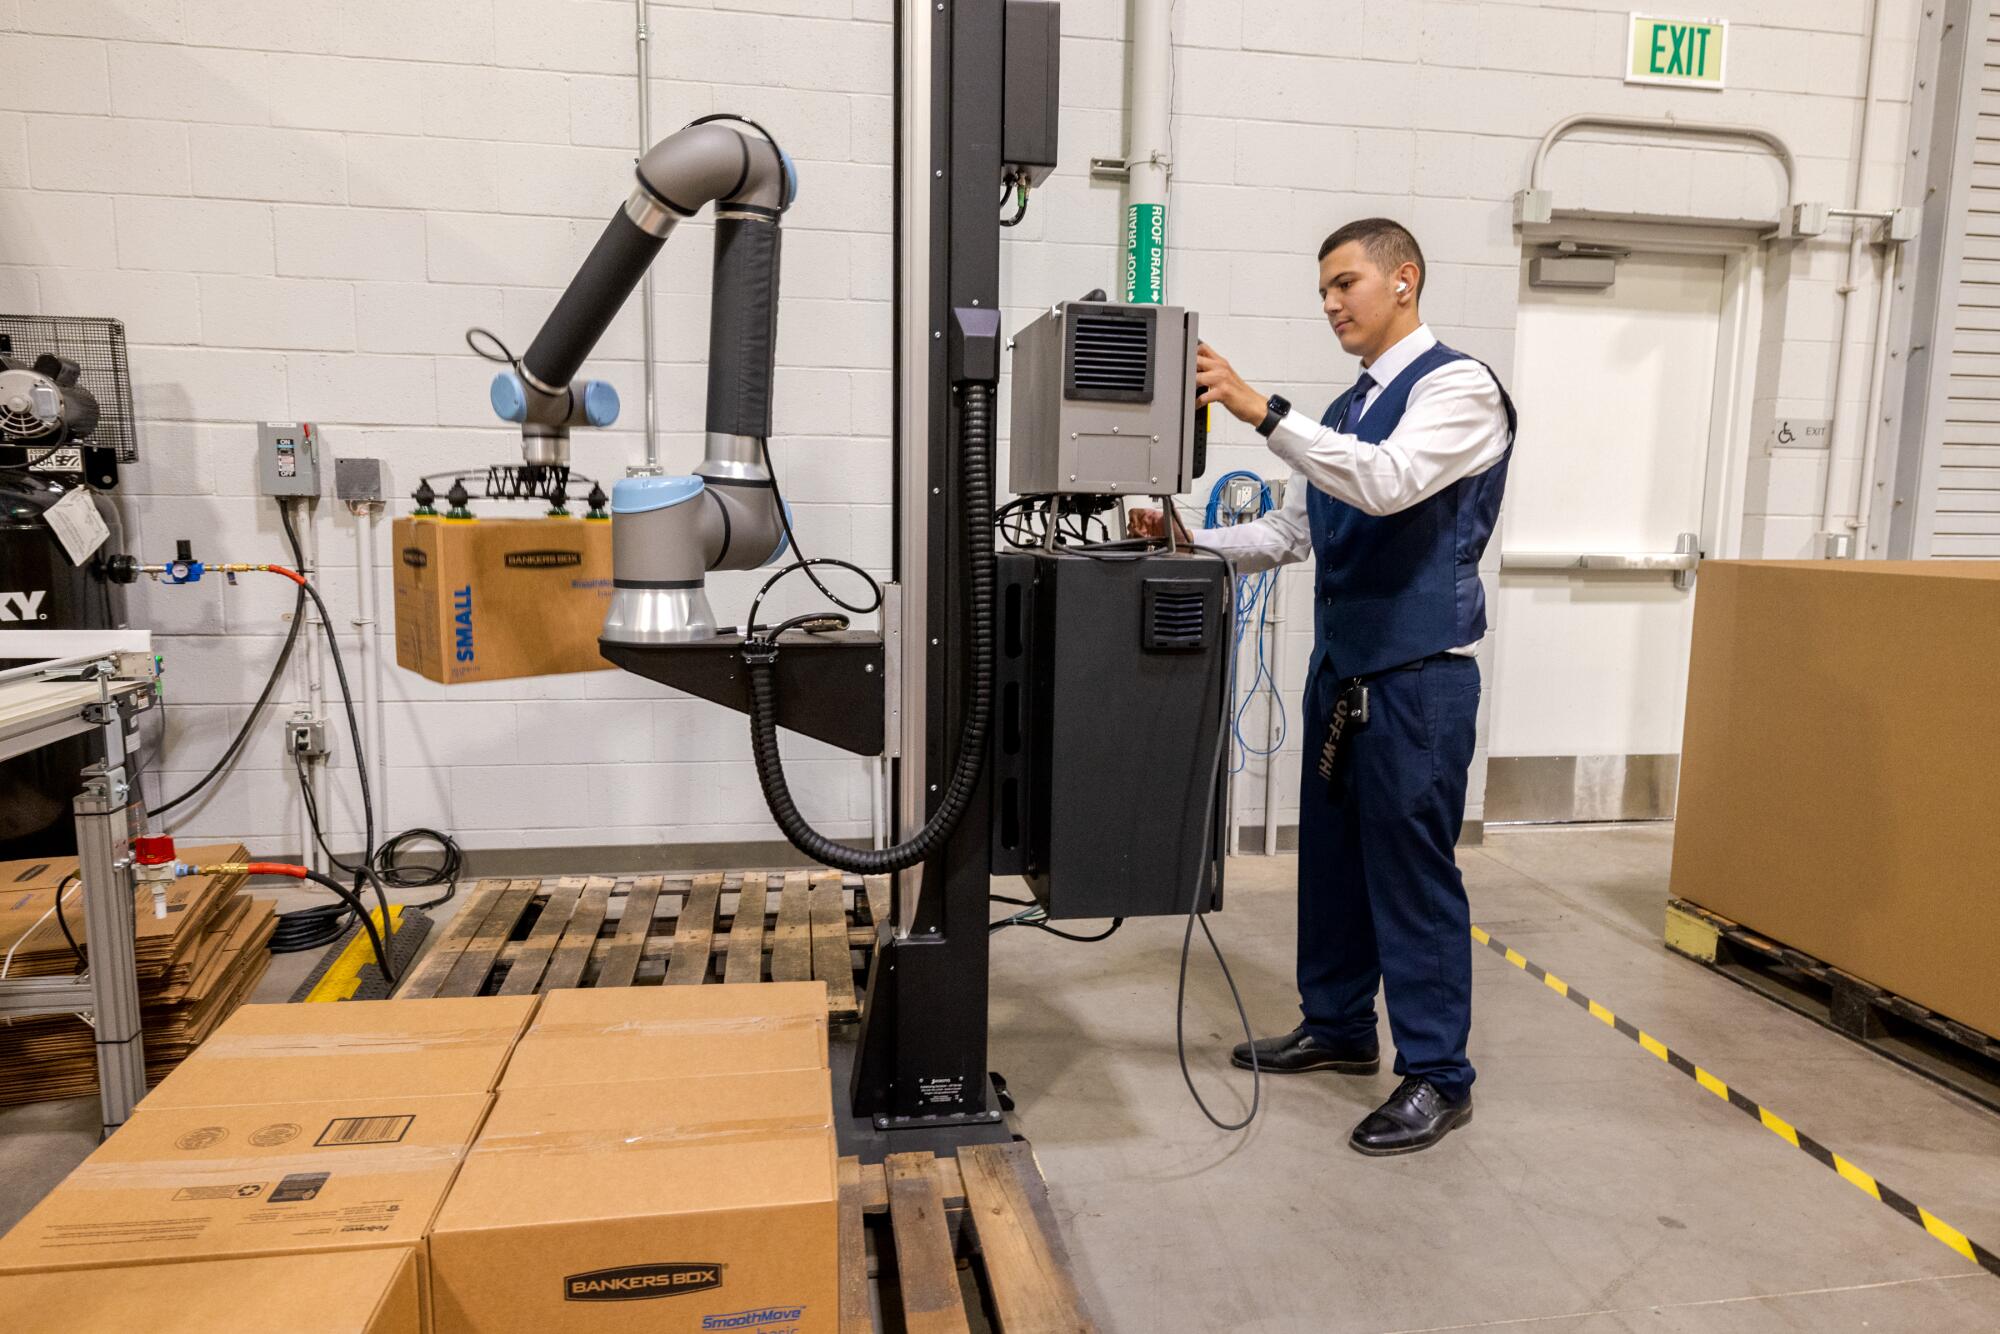 A high school student operates a robotic arm to move packages in a building.